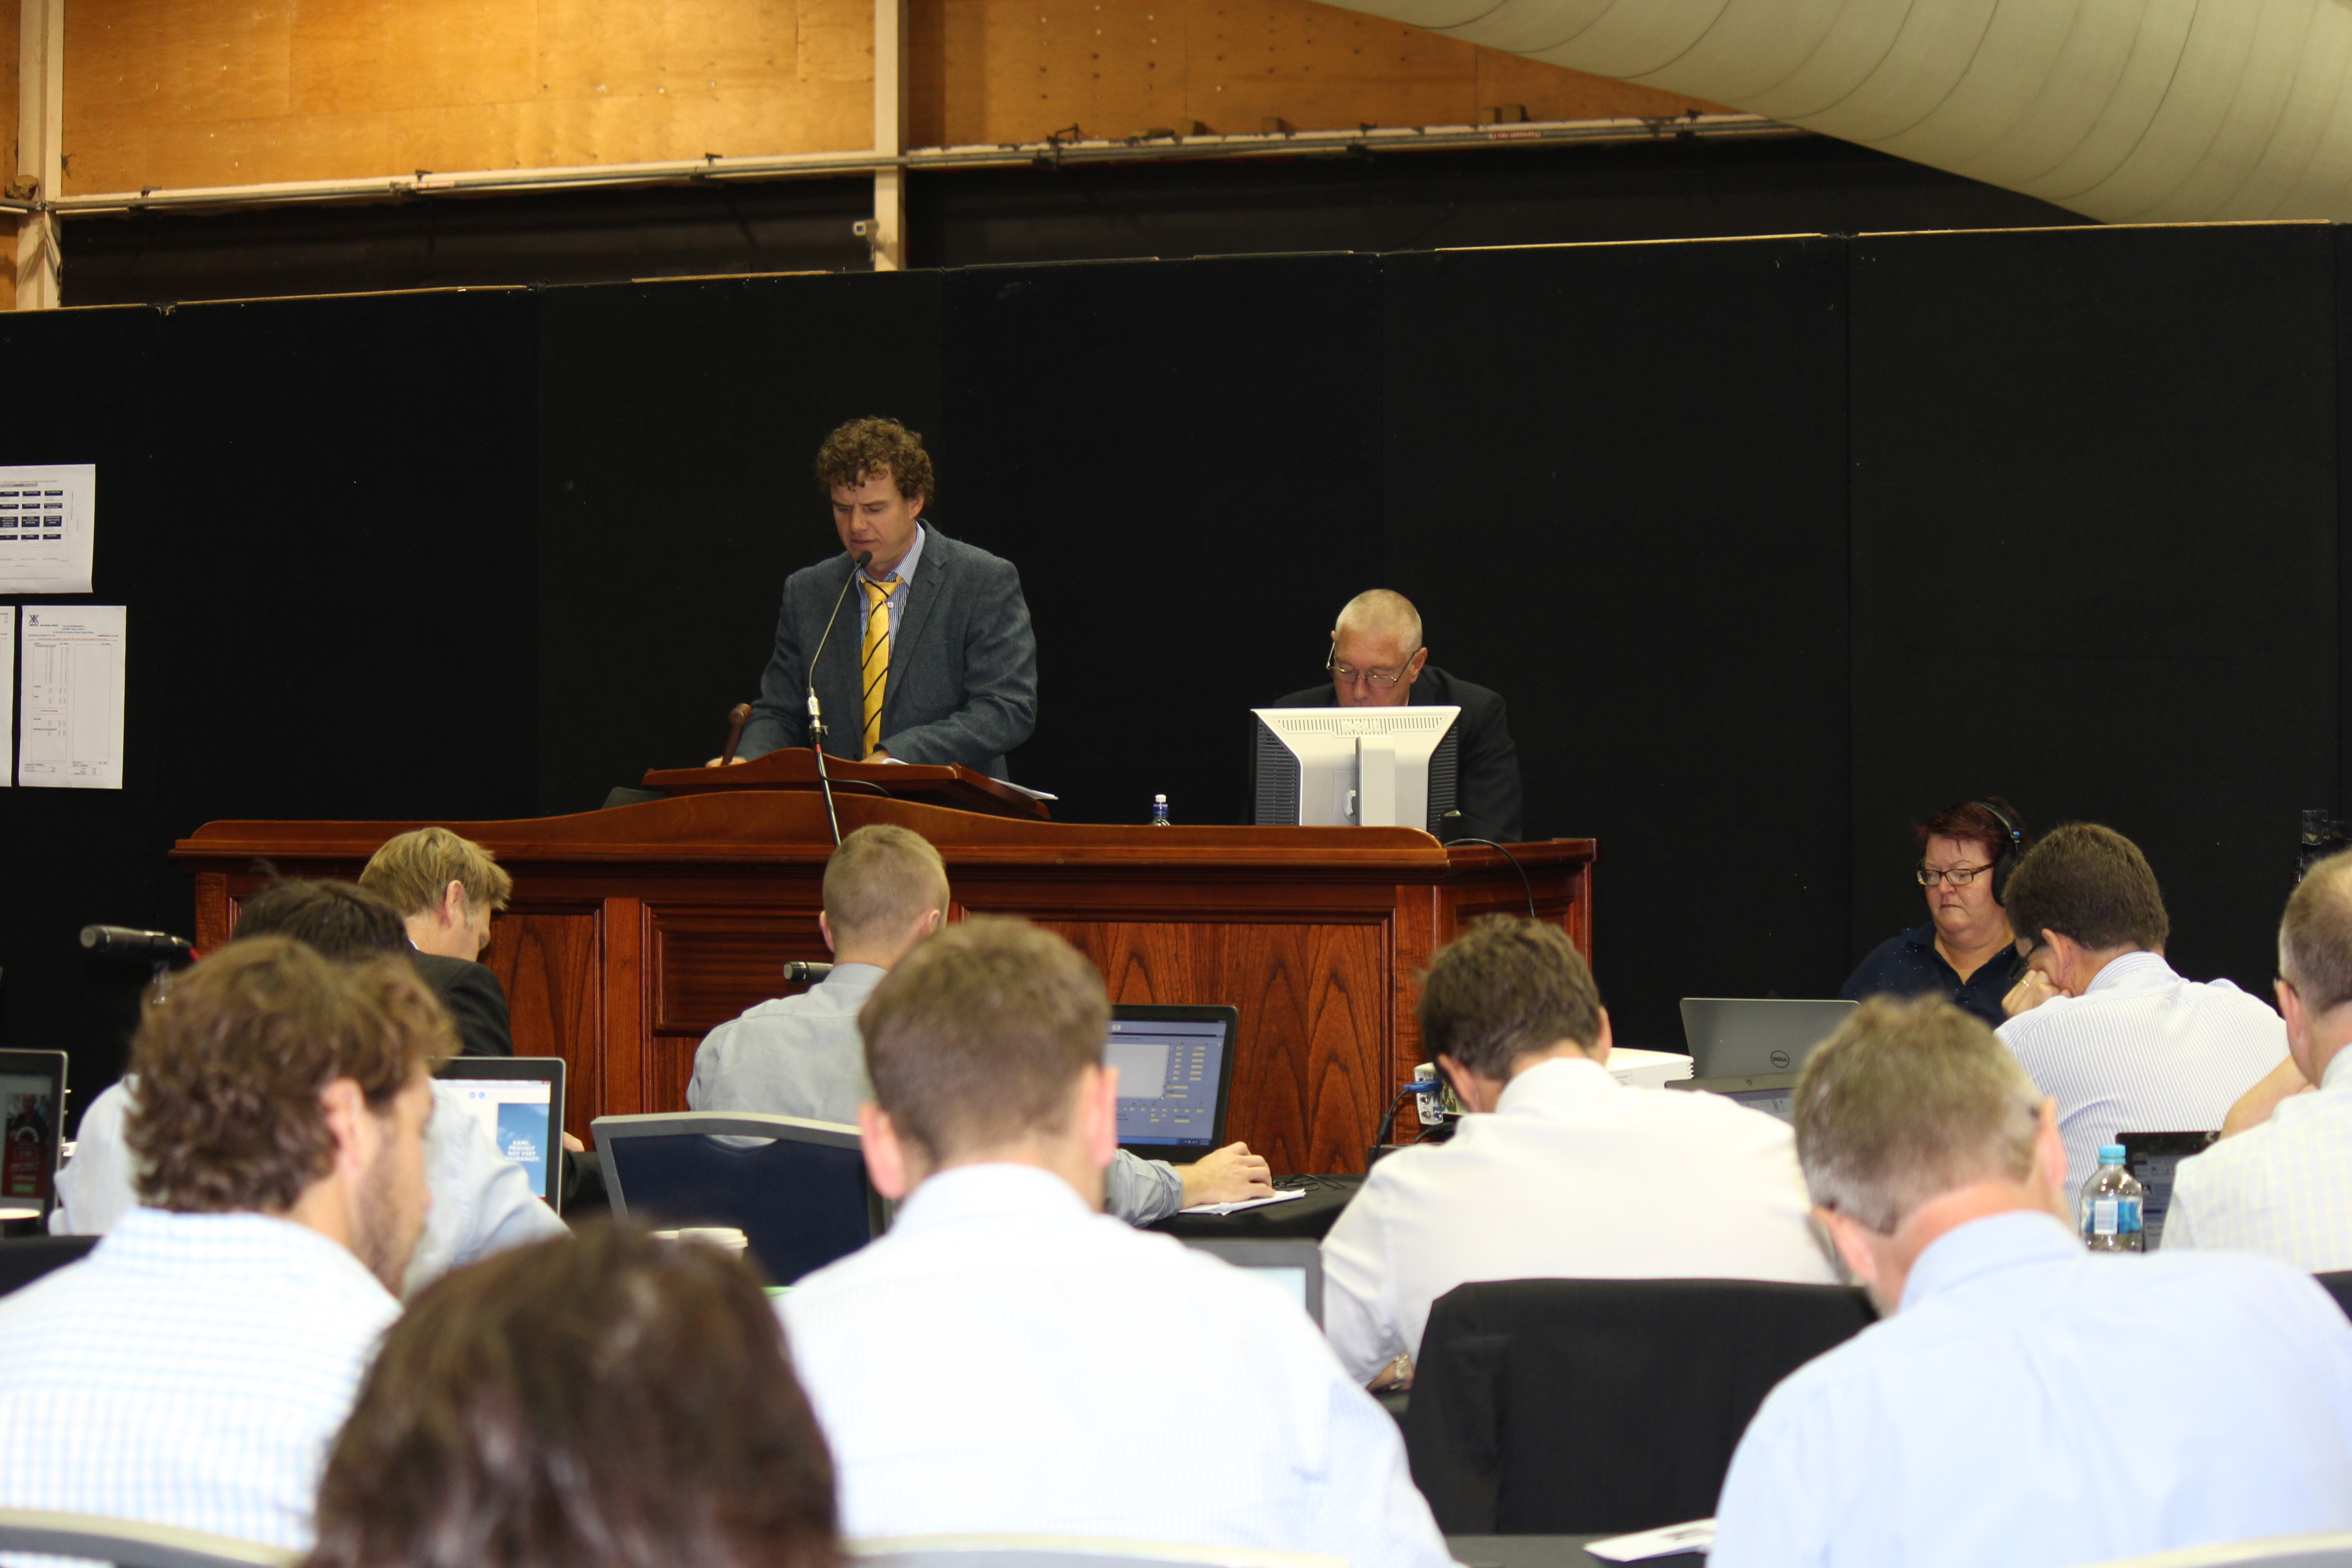 Our Auctioneers sell the wool on behalf of the growers to Buyers  at the weekly Auction